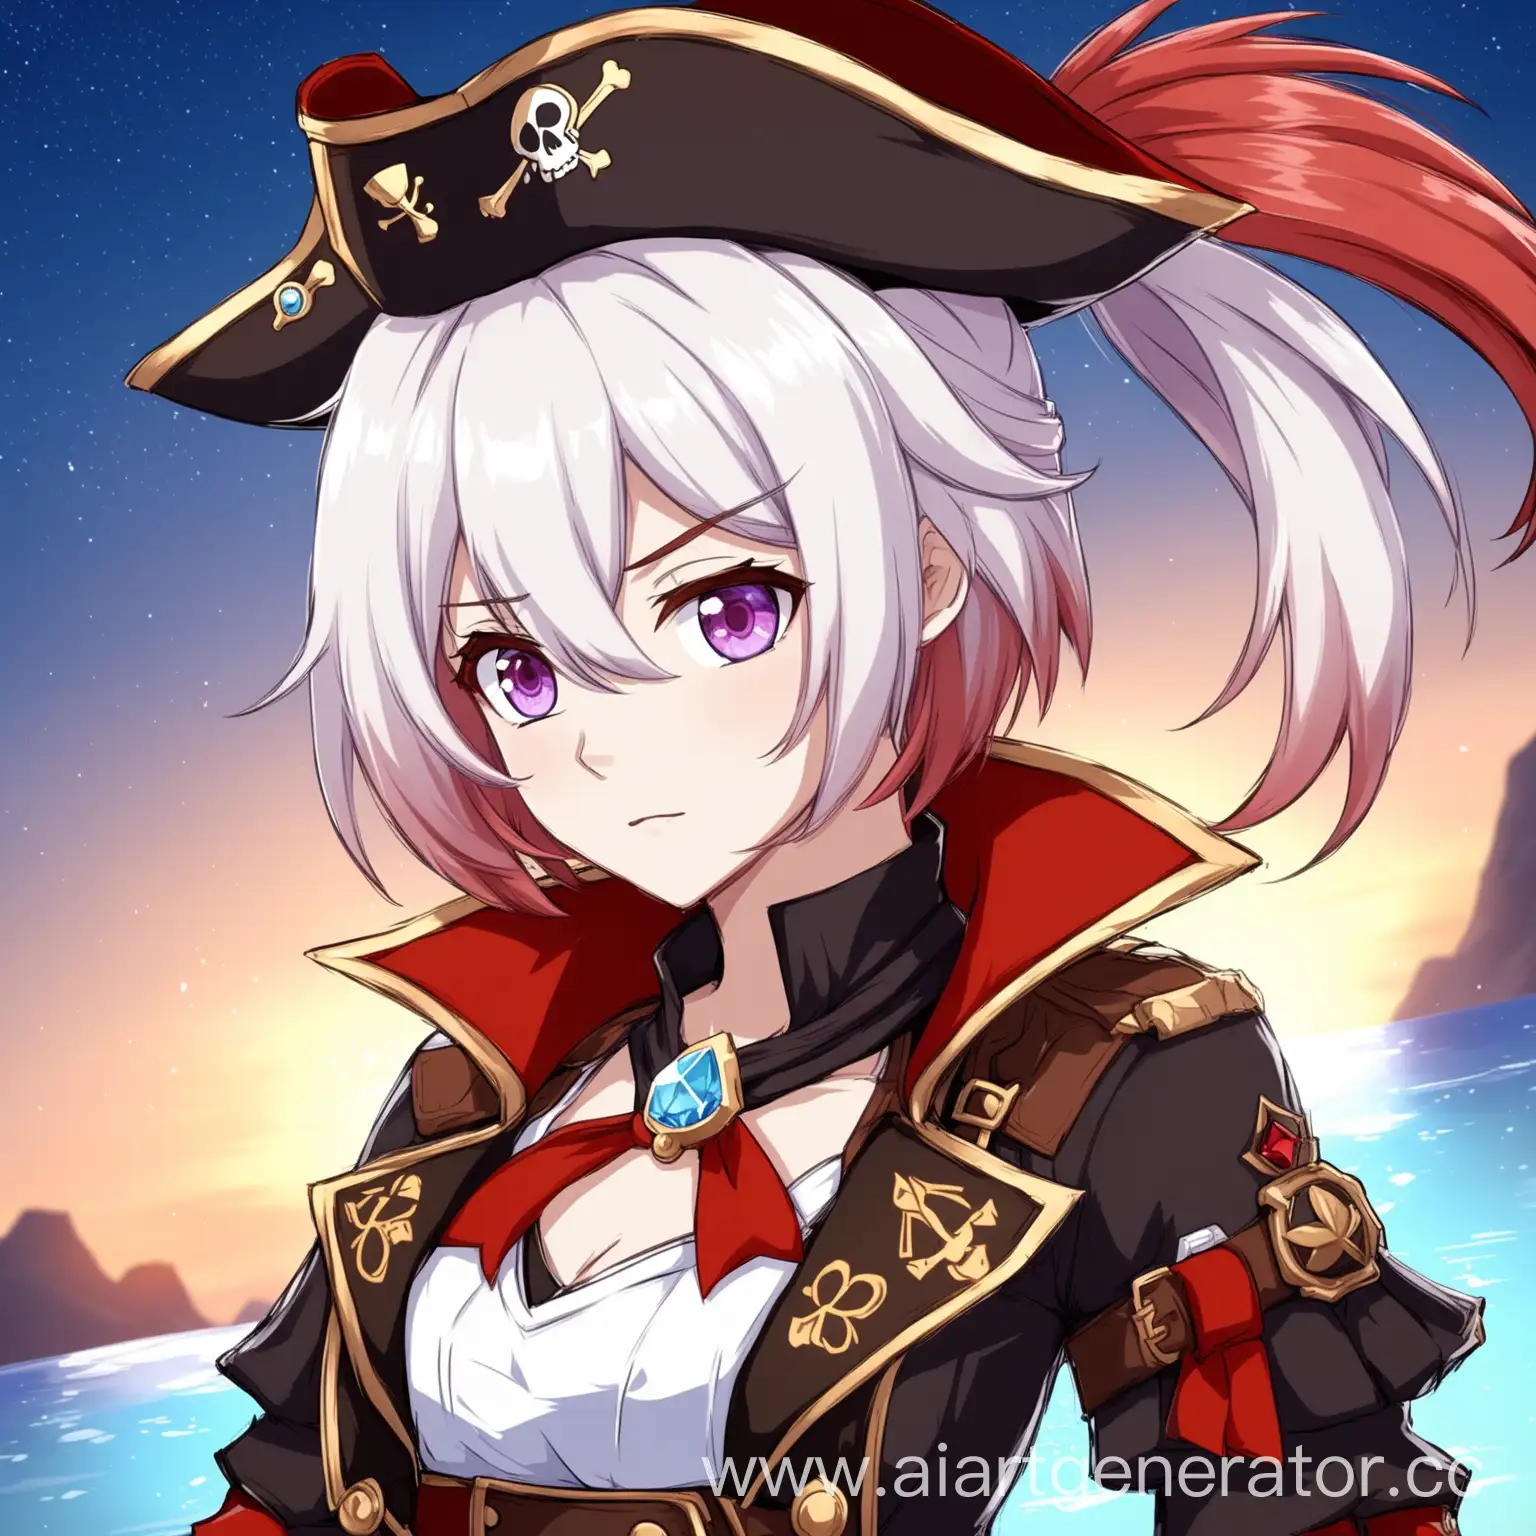 Anime-Pirate-Girl-Topaz-from-Honkai-Star-Rail-with-Lavender-Eyes-and-White-Hair